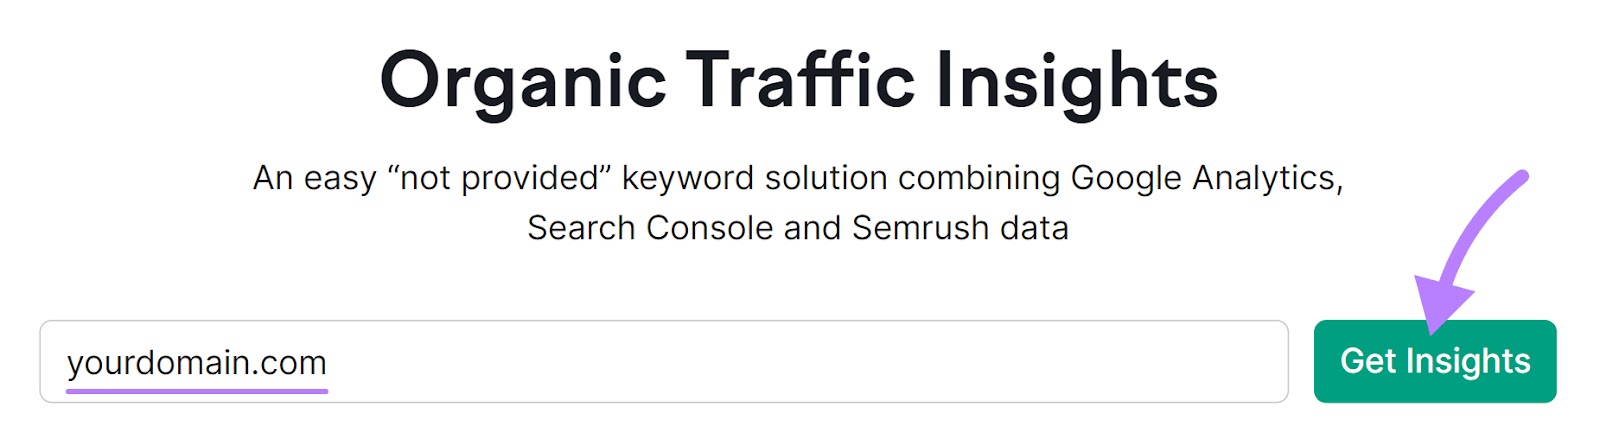 Organic Traffic Insights tool with "yourdomain.com" in the search bar and the "Get Insights" button highlighted.